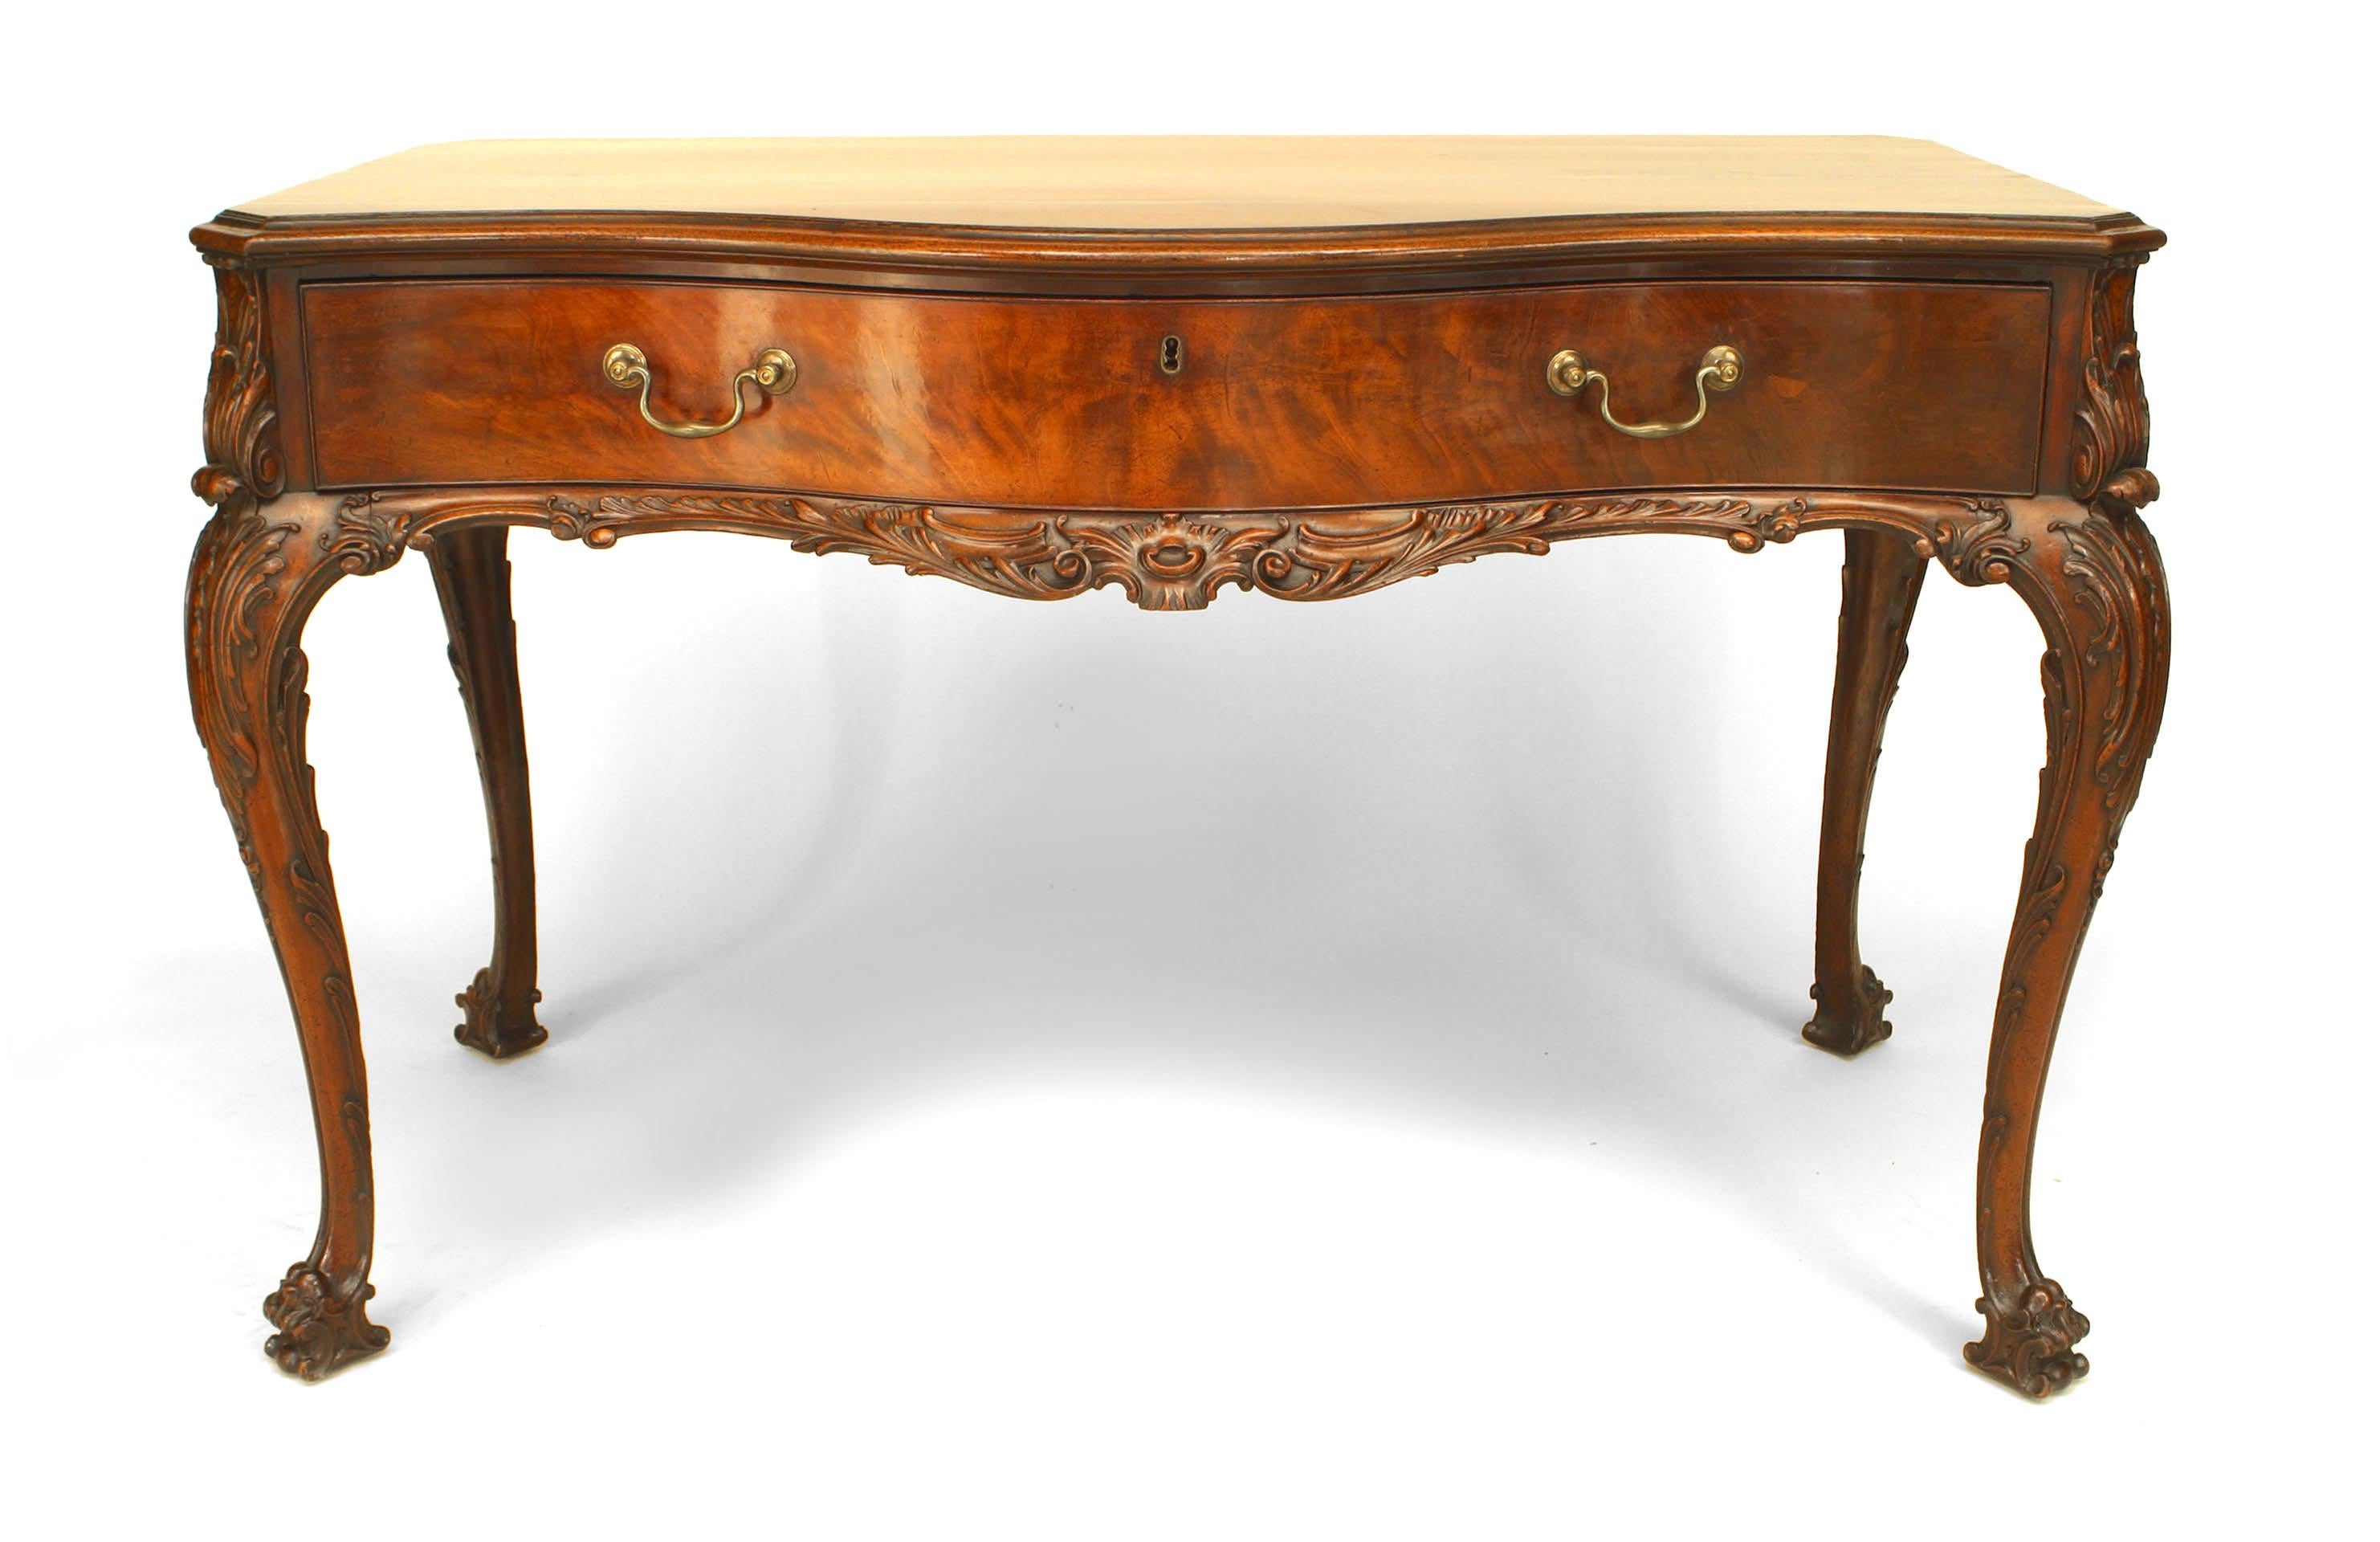 18th-19th century English Chippendale style mahogany table desk with a serpentine shaped front and a drawer with a sliding leather top supported on carved cabriole legs.